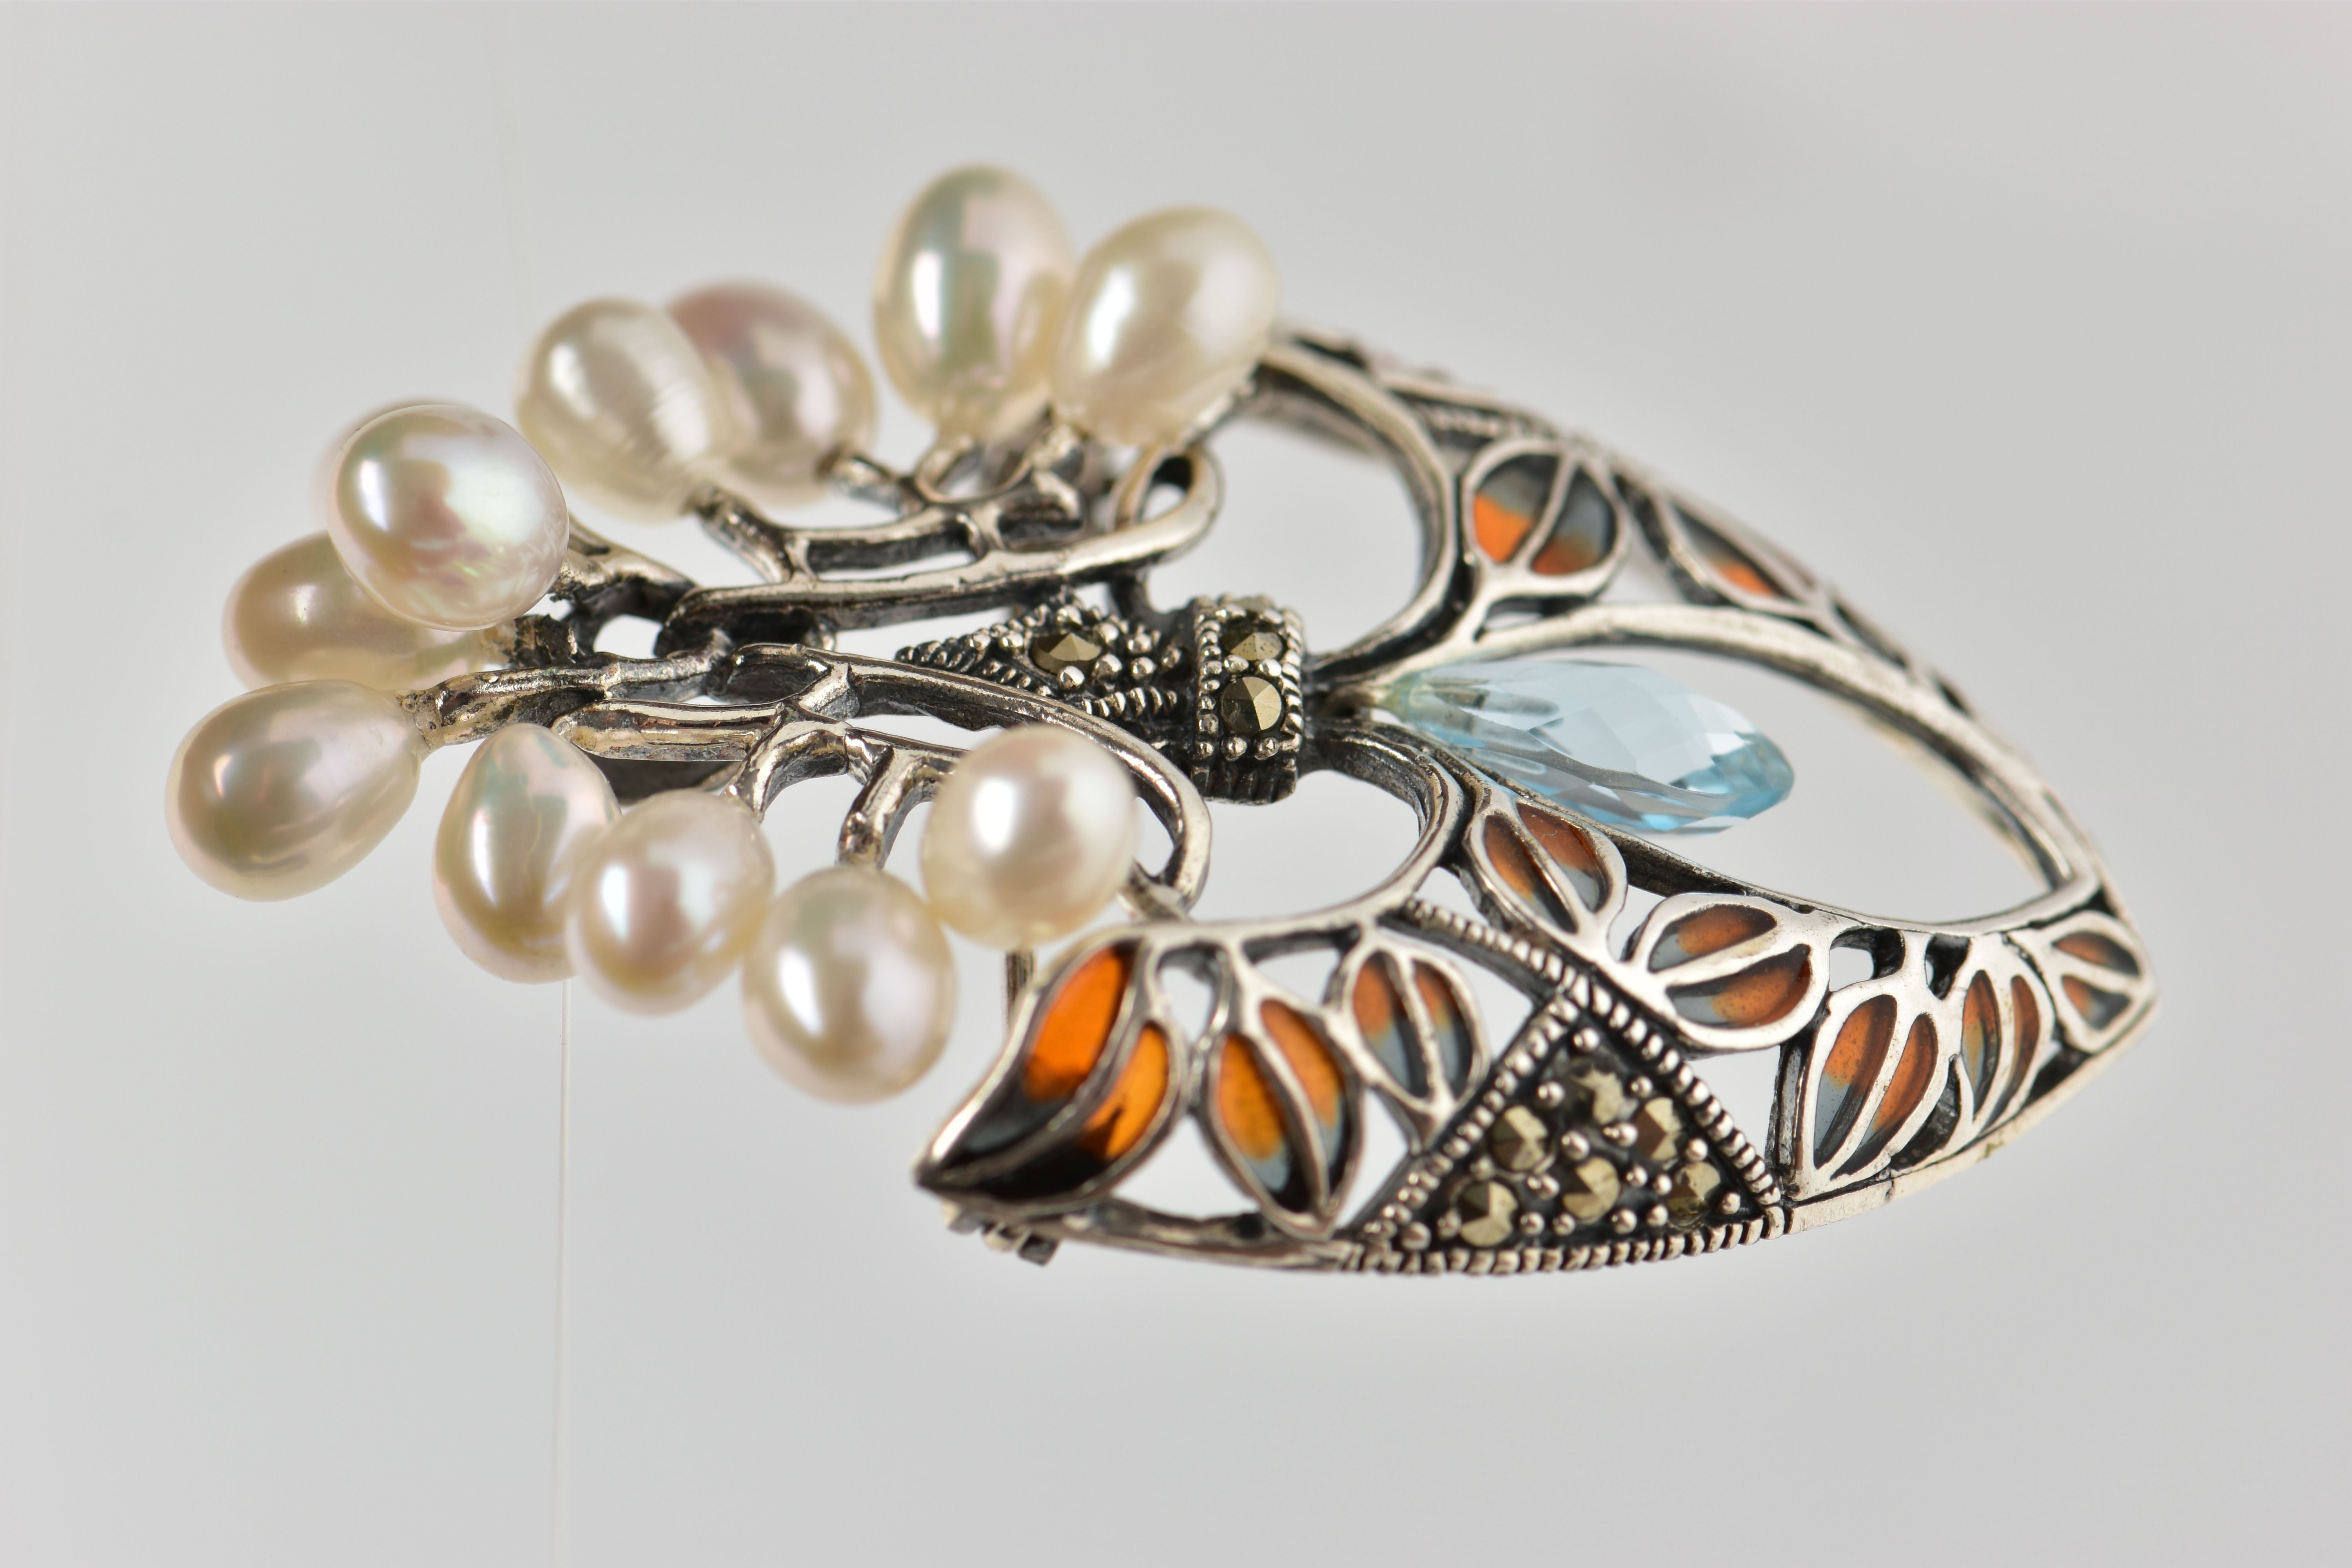 A PLIQUE A JOUR BROOCH, of a shield shape, set with marcasite and cultured pearls, suspending a - Image 2 of 3